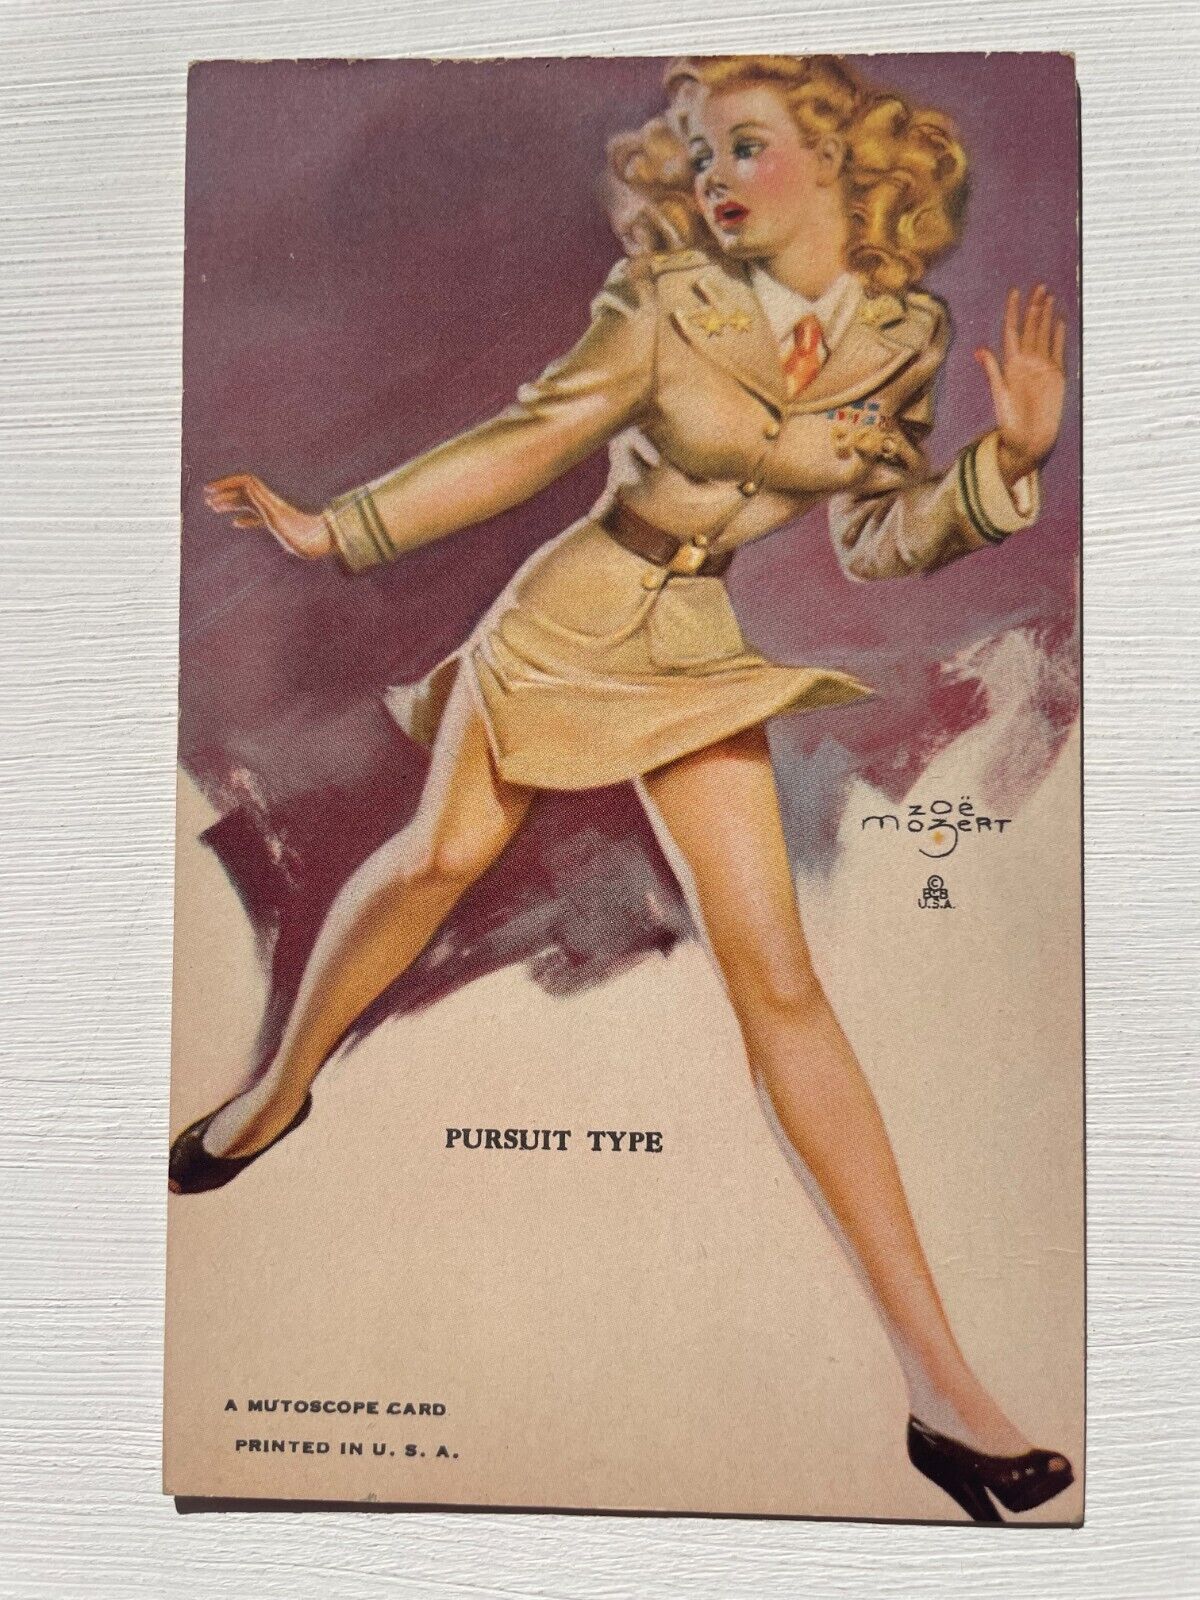 1940's Pinup Girl Picture Mutoscope Card- Zoe Mozert- Pursuit Type